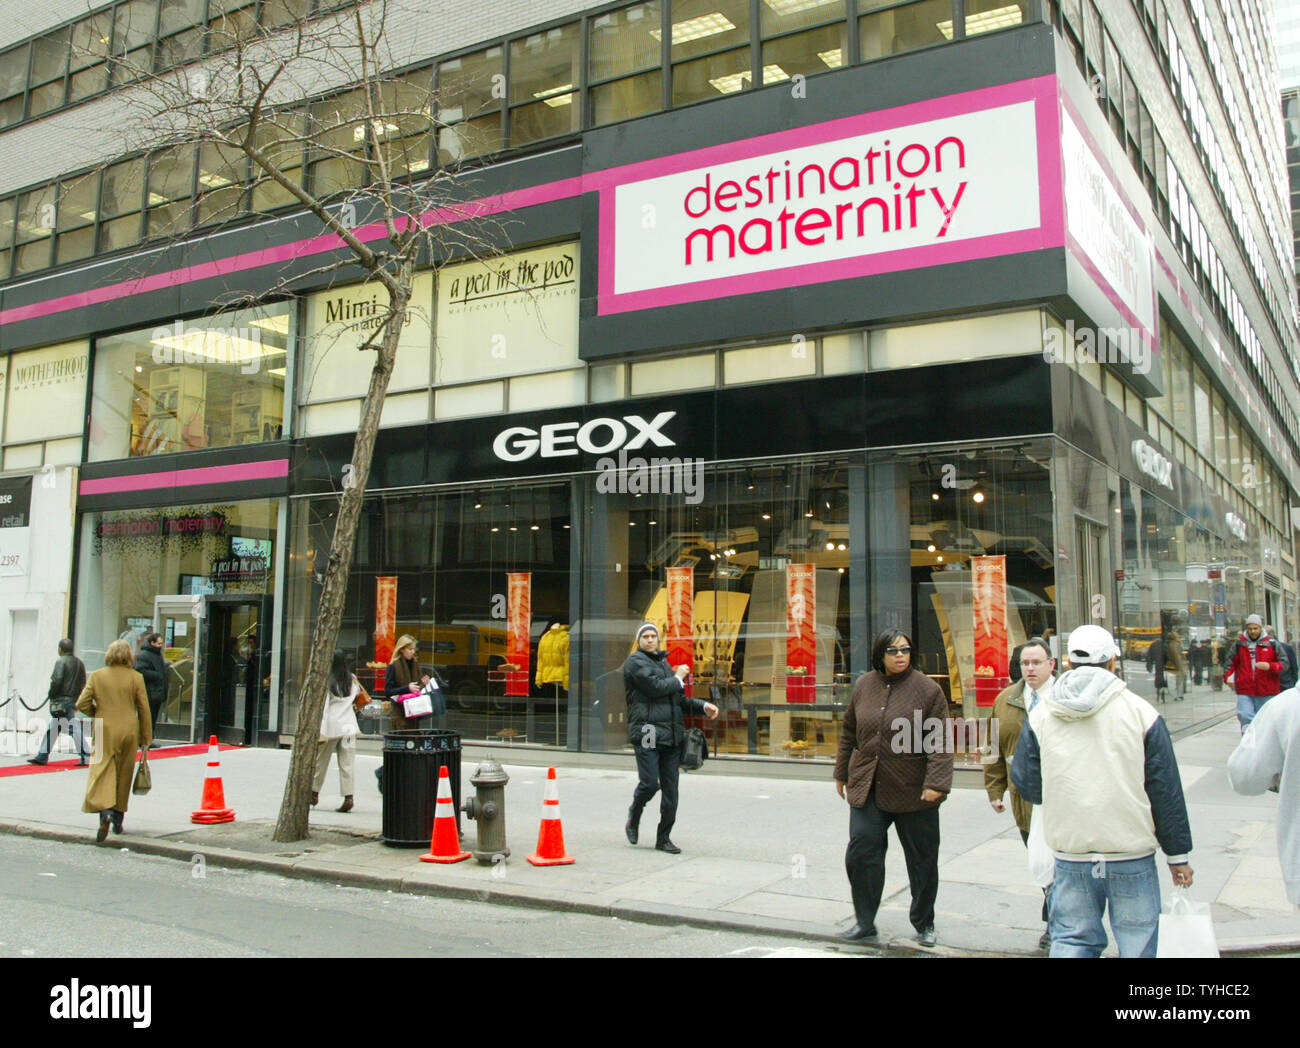 Destination Maternity, the flagship store which offers maternity clothing, exercise classes and even a lounge for the fathers-to-be, celebrates its grand opening on February 1, 2006 in New York City. (UPI Photo/Monika Graff) Stock Photo